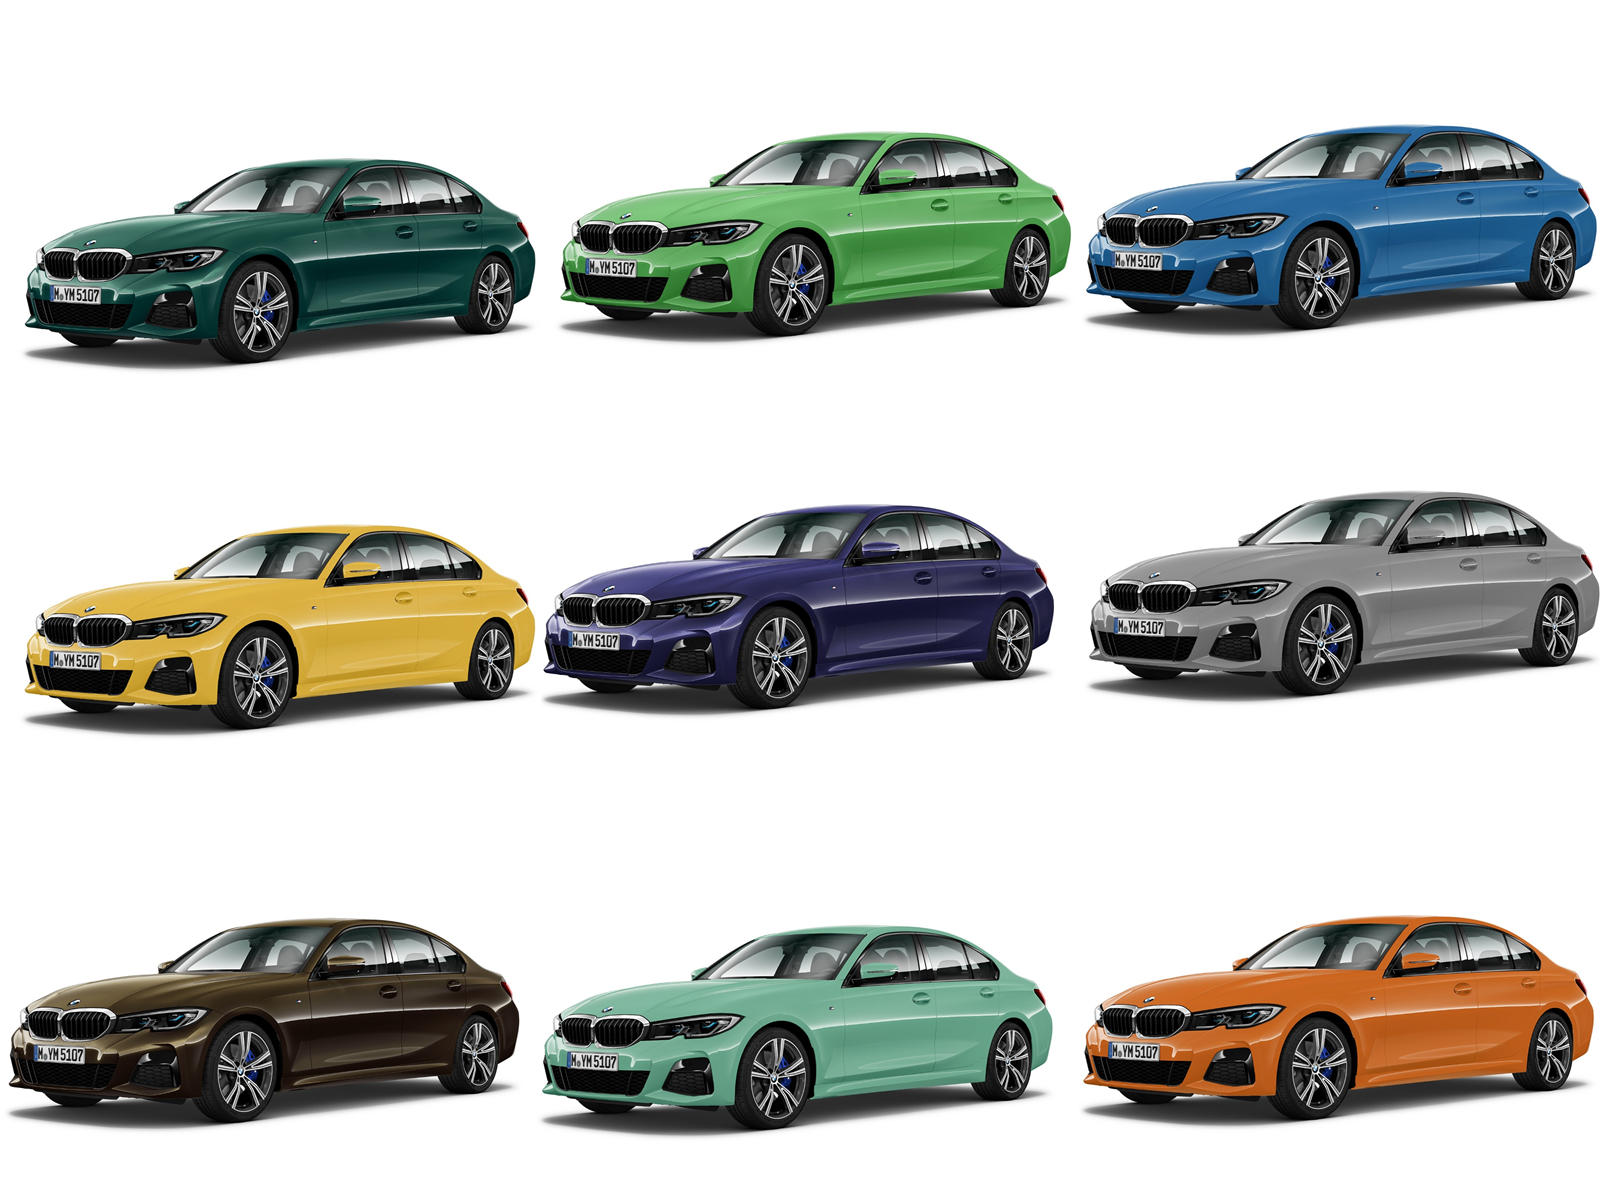 BMW paint finishes: Shades of Black and Grey